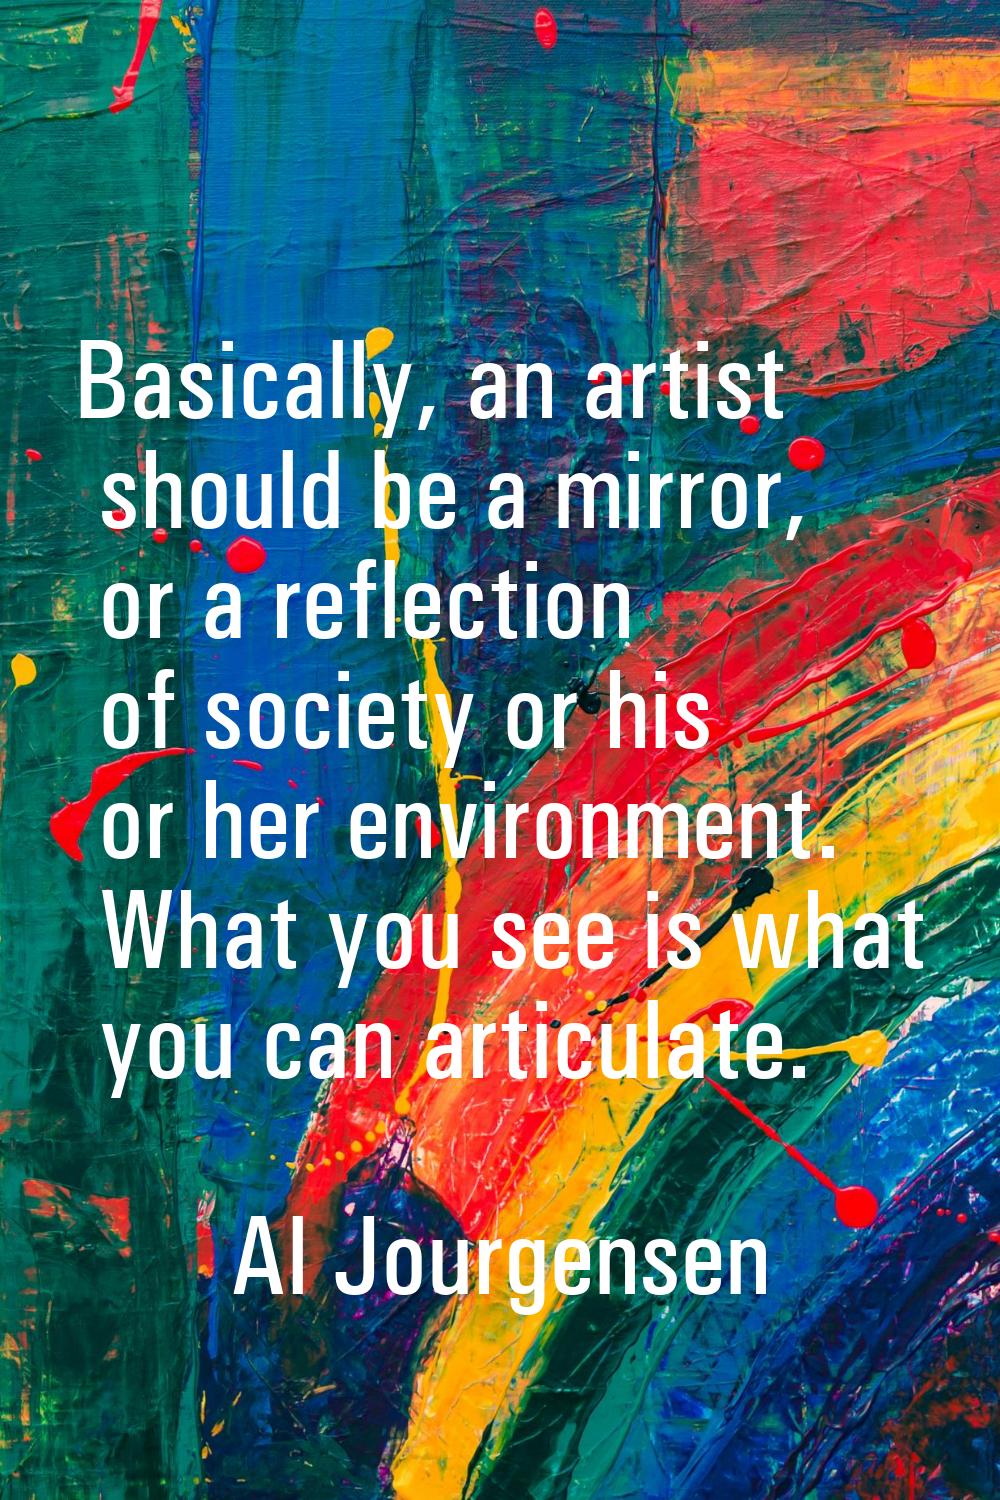 Basically, an artist should be a mirror, or a reflection of society or his or her environment. What